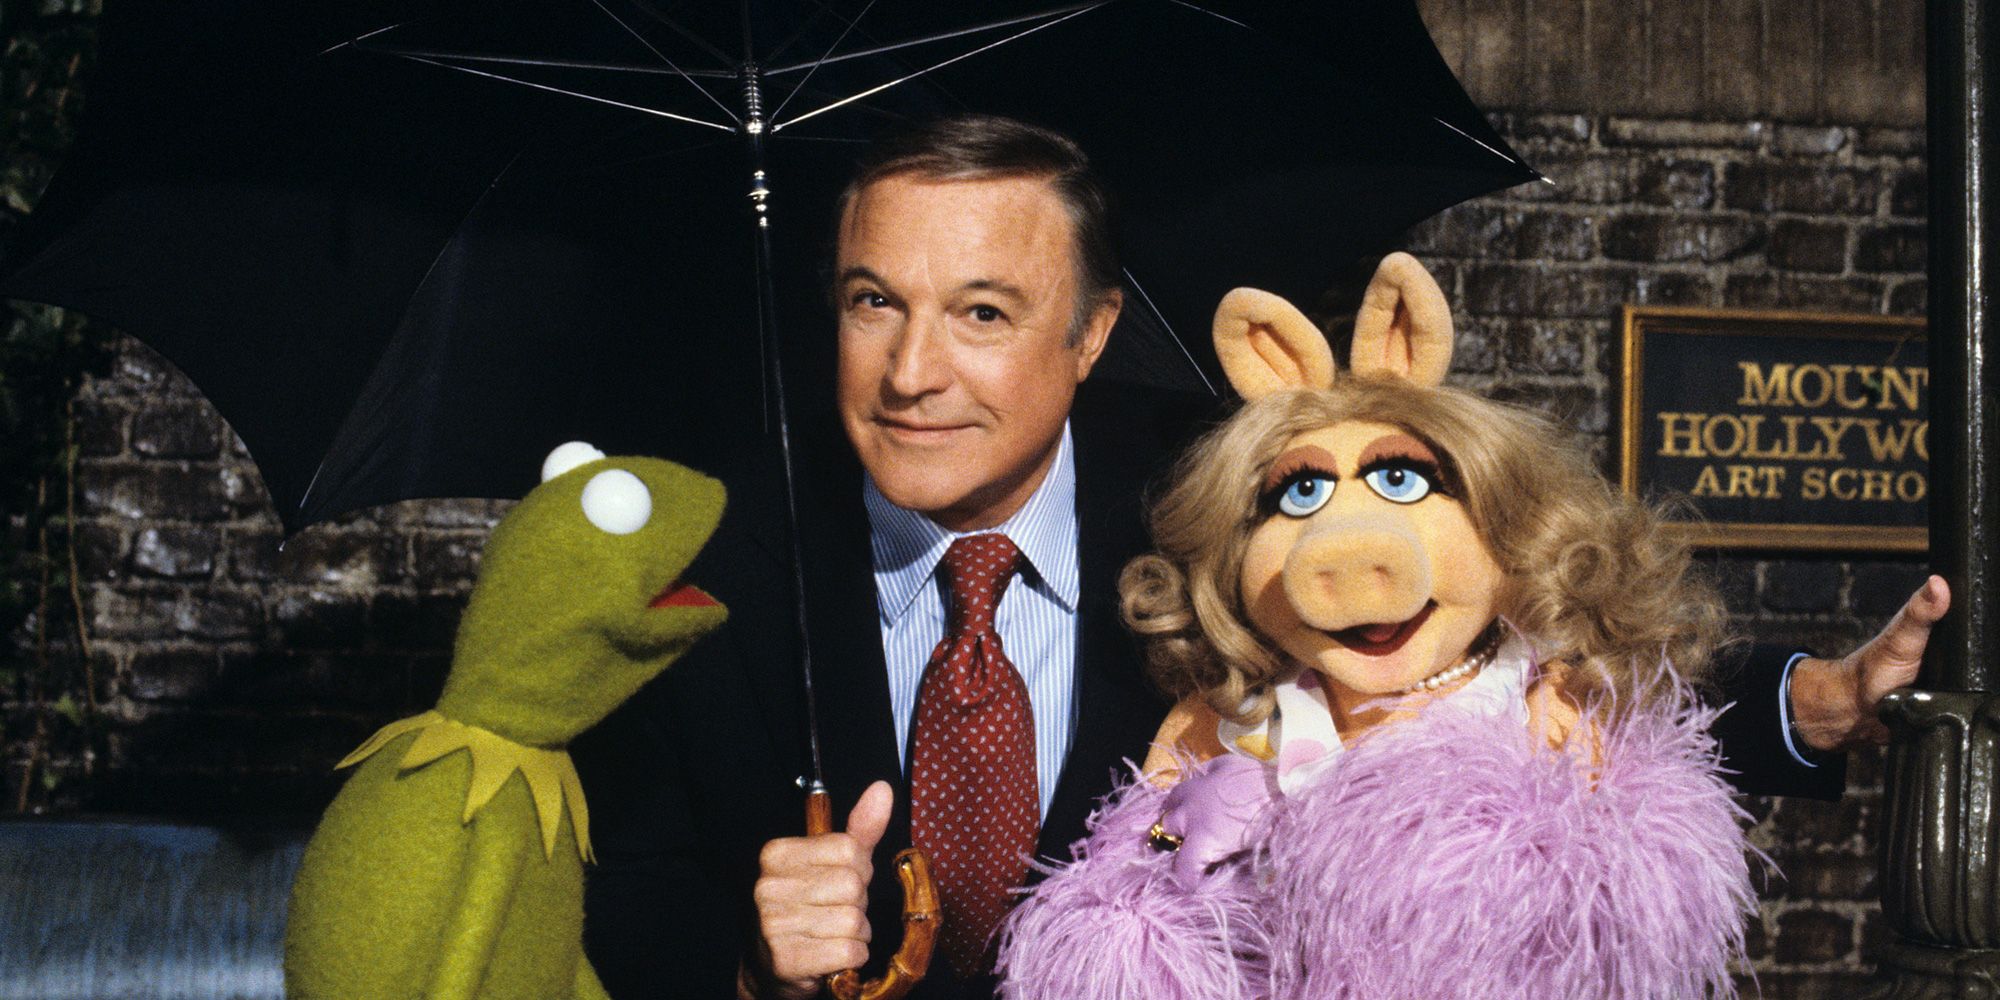 Actor Gene Kelly holding an umbrella and posing with Kermit the Frog and Miss Piggy